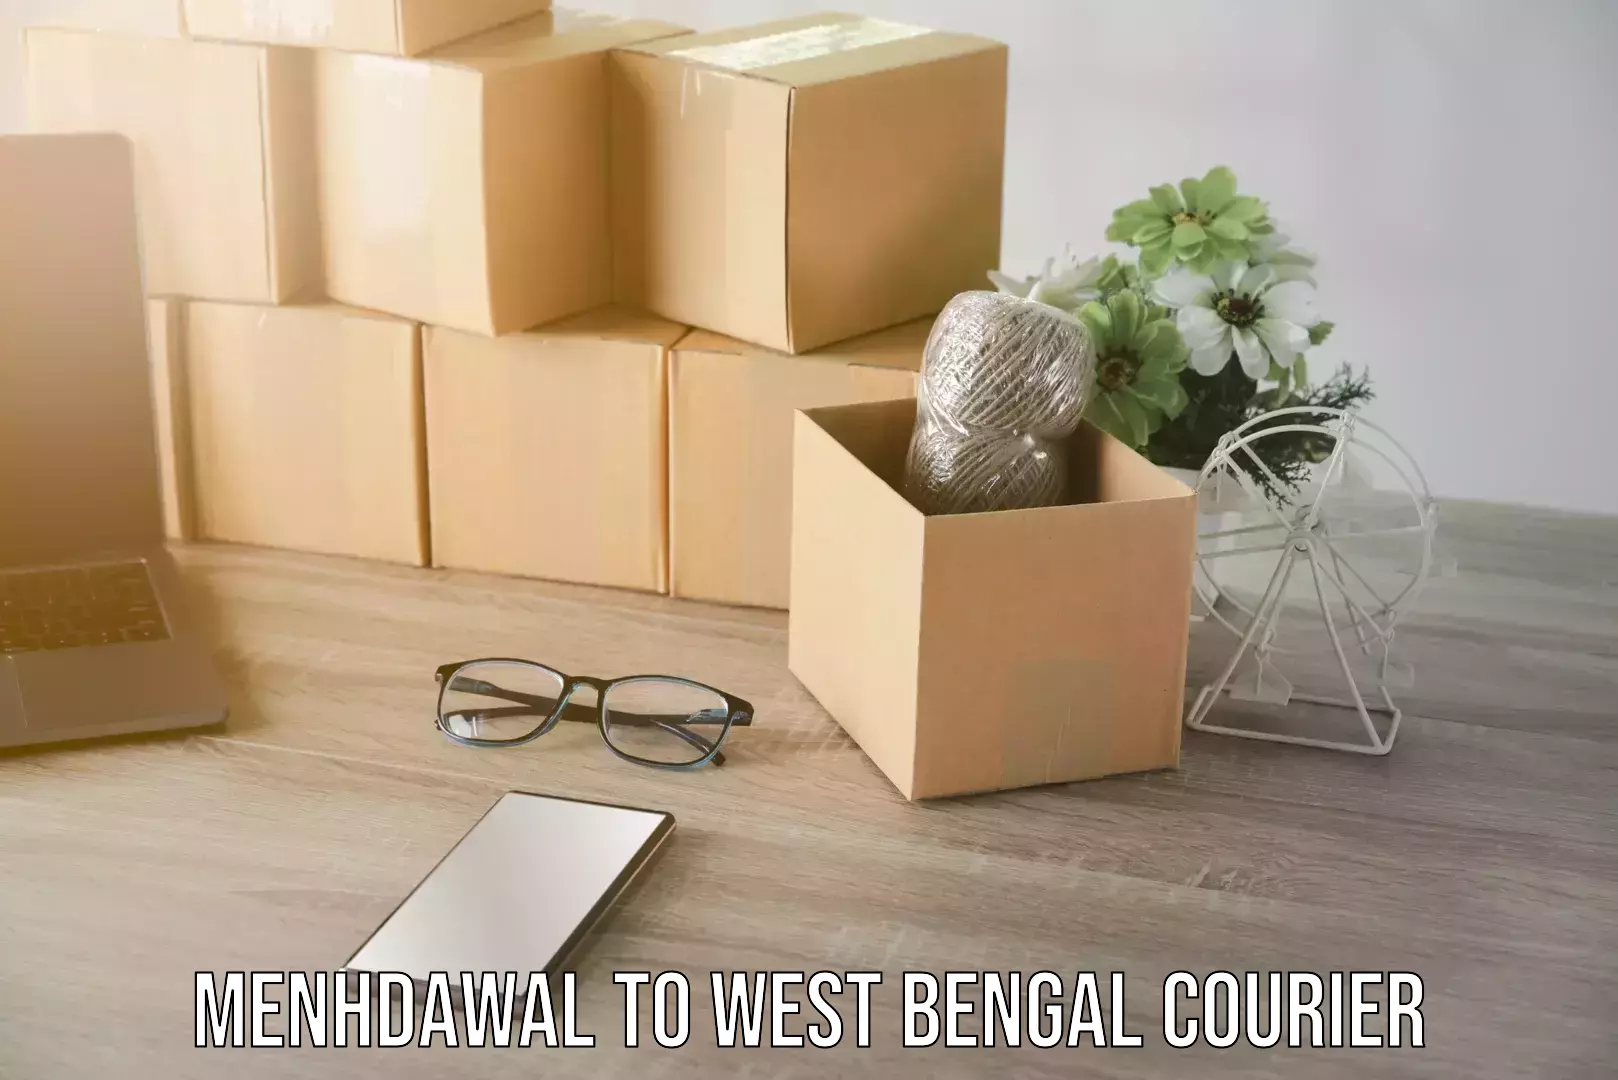 Furniture relocation experts Menhdawal to West Bengal